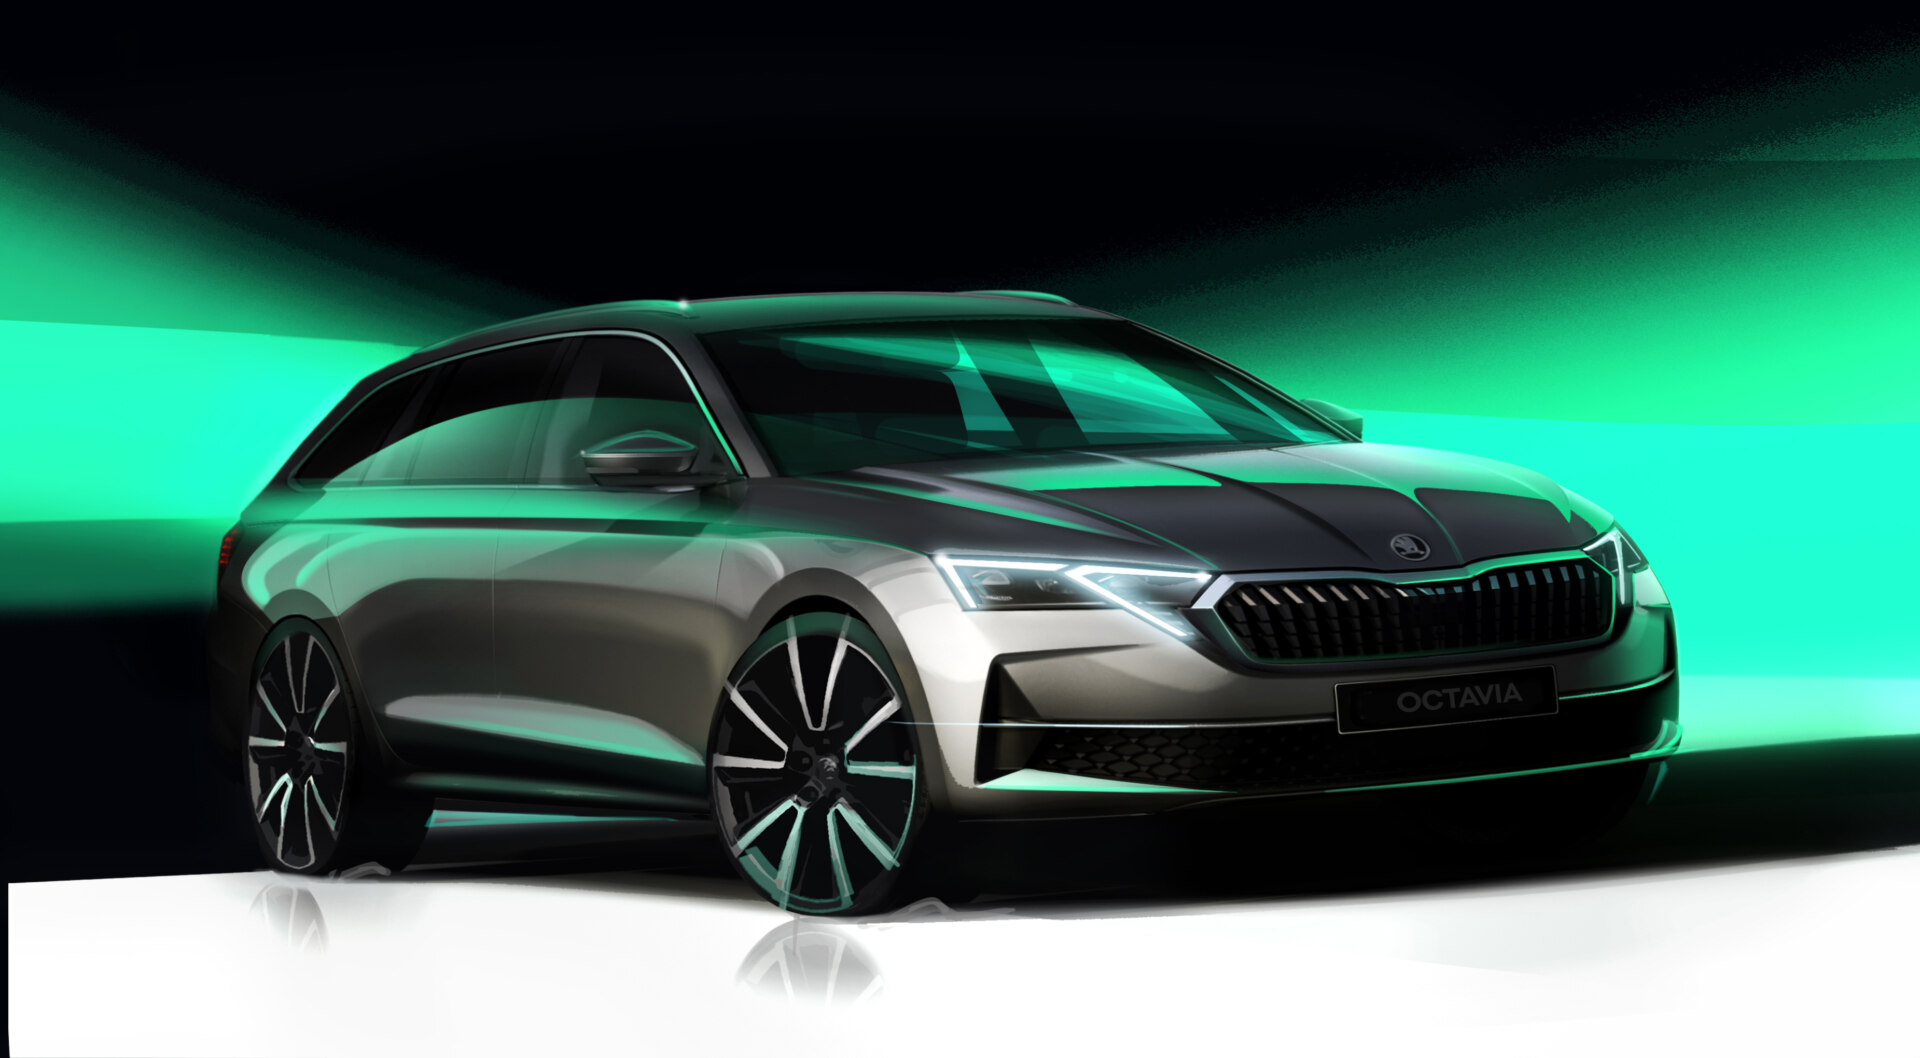 Skoda Octavia EV Coming Later This Decade On Electric-Only Platform